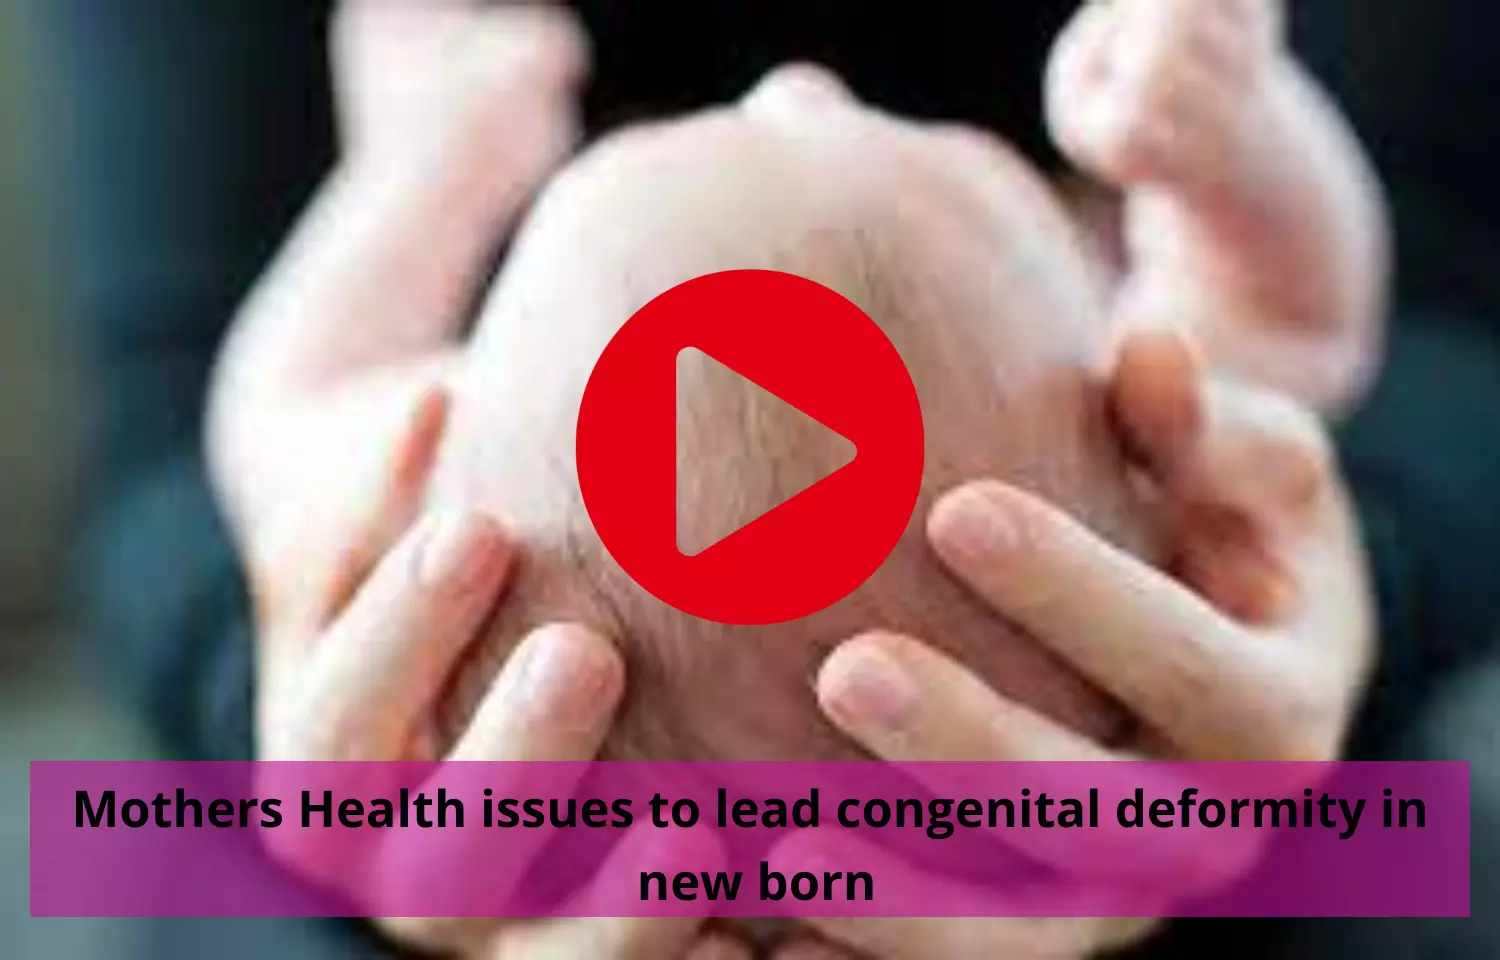 Mothers Health issues to affect congenital deformity in new born